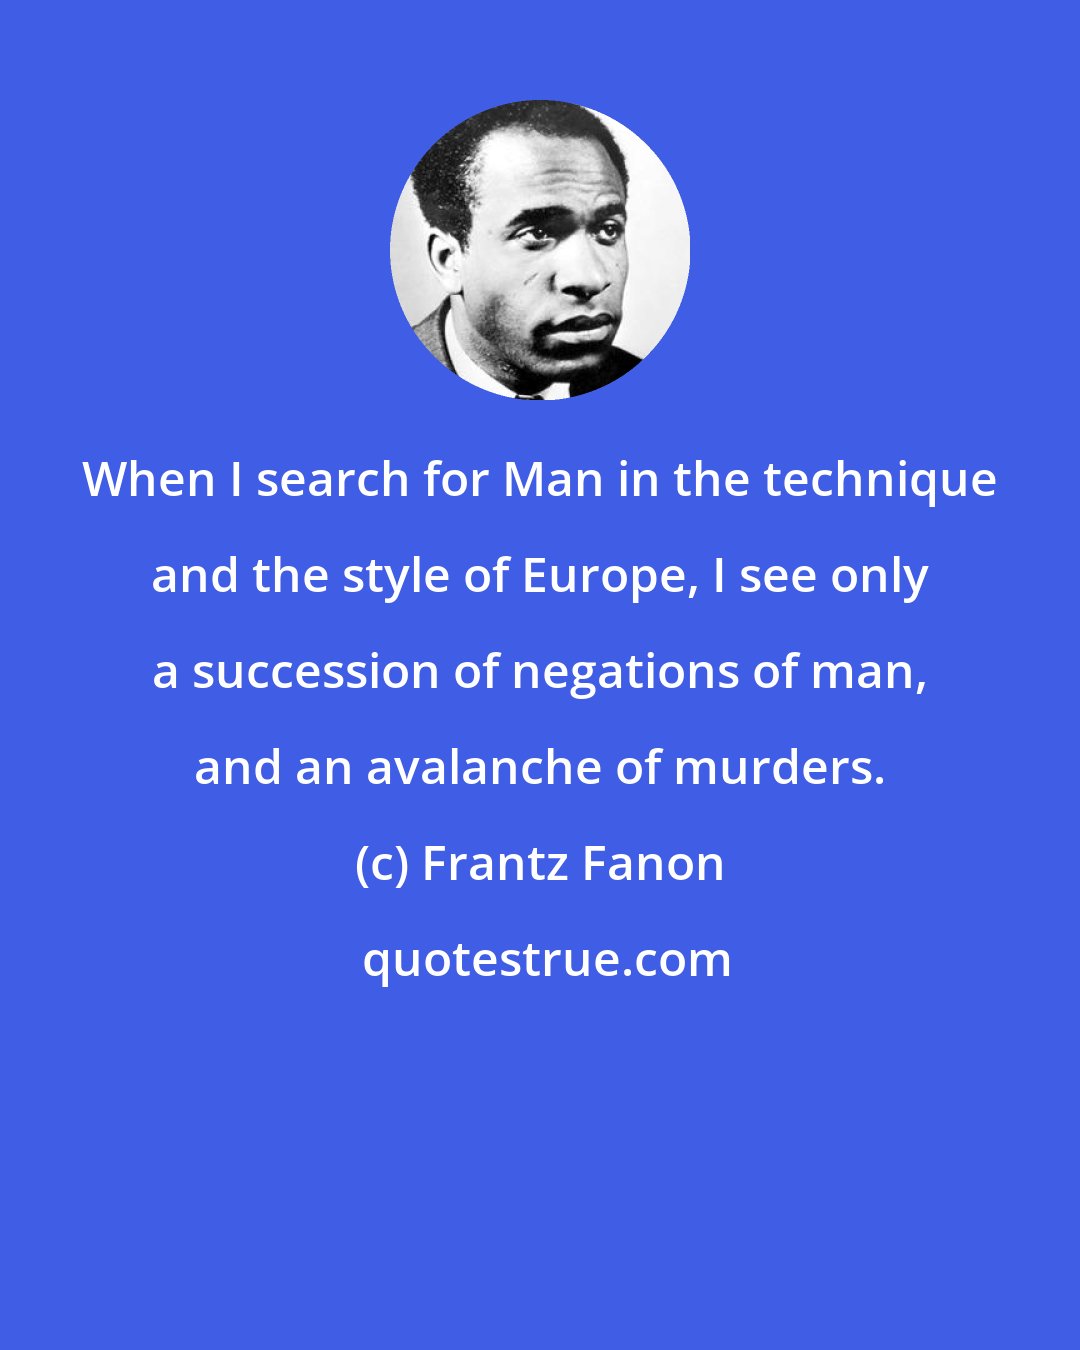 Frantz Fanon: When I search for Man in the technique and the style of Europe, I see only a succession of negations of man, and an avalanche of murders.